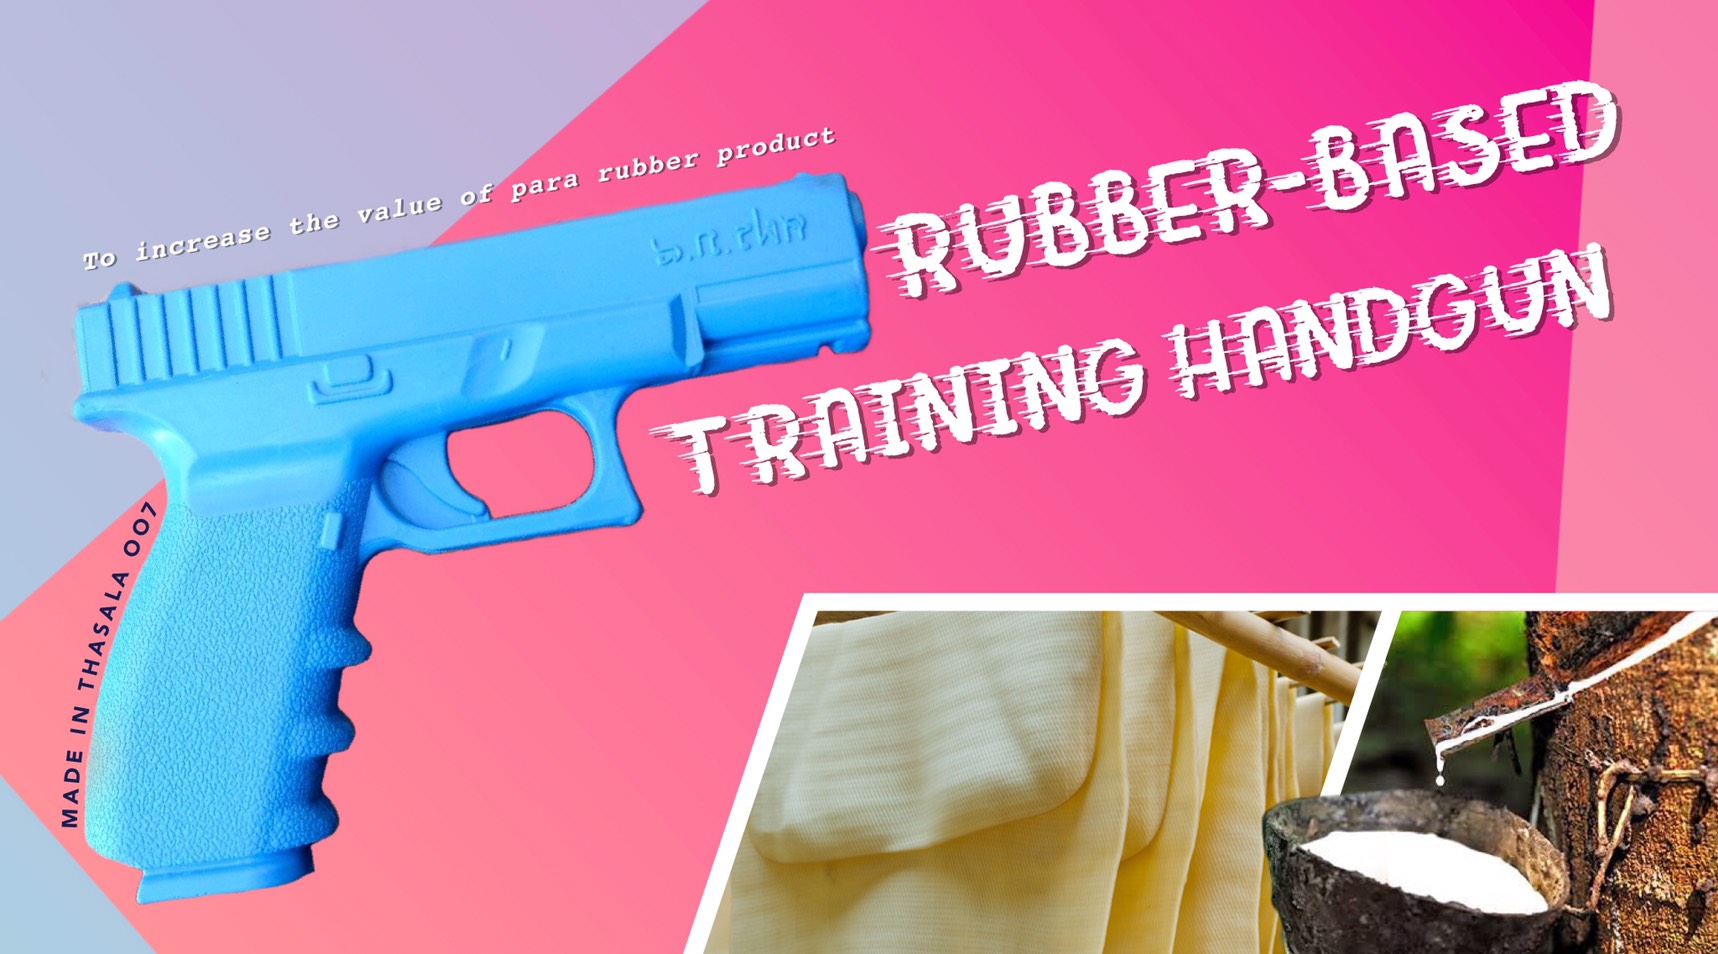 Rubber-Based Training Handgun ‒ to increase value of para rubber product